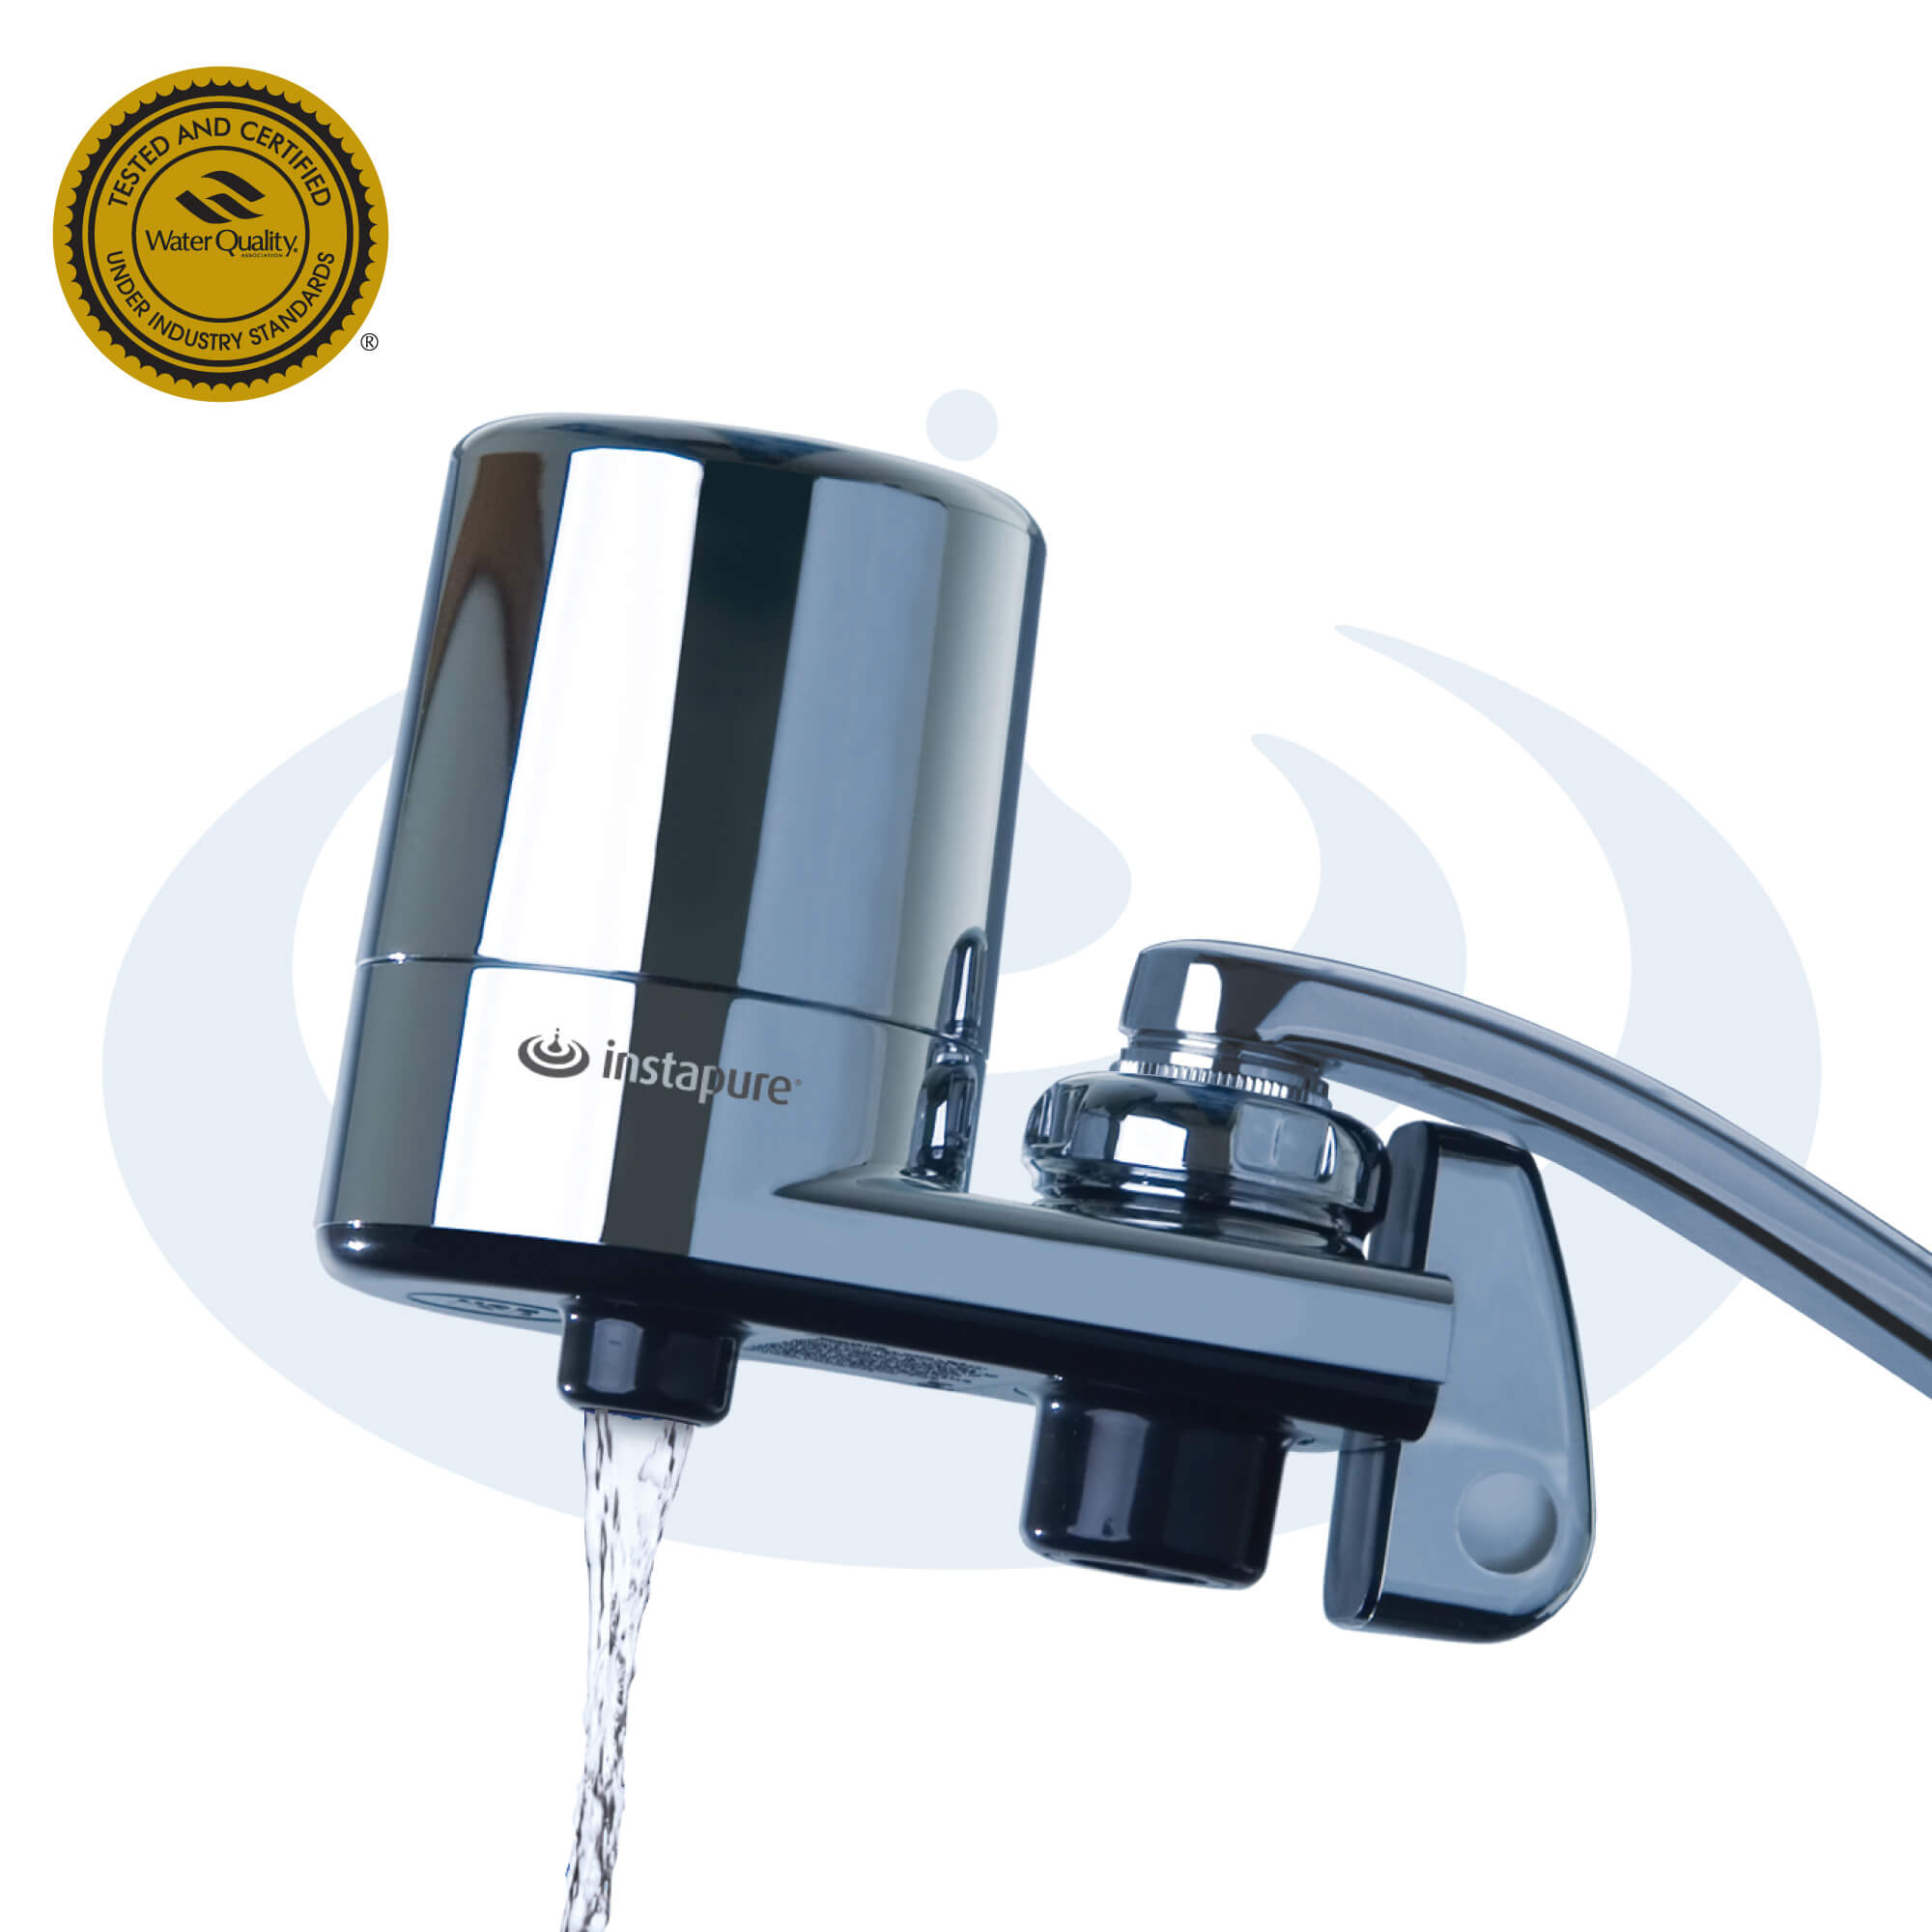 Tap water filter system complete with chrome swan neck filter tap